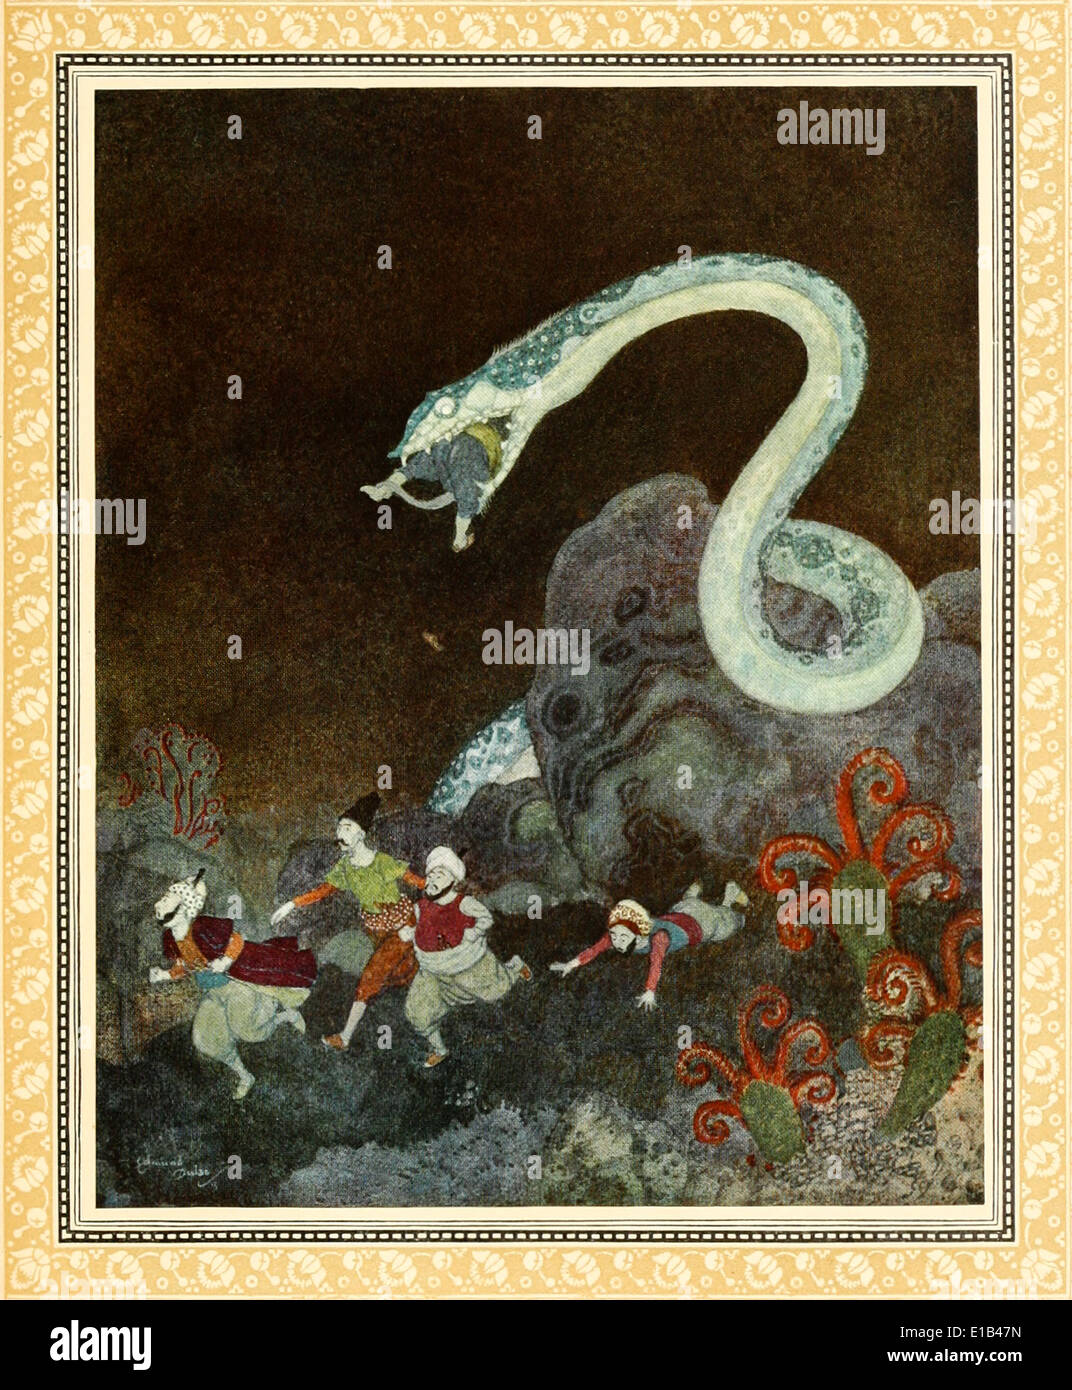 Edmund Dulac (1882-1953) illustration from ‘Sinbad the Sailor & Other Stories from the Arabian Nights’. Stock Photo